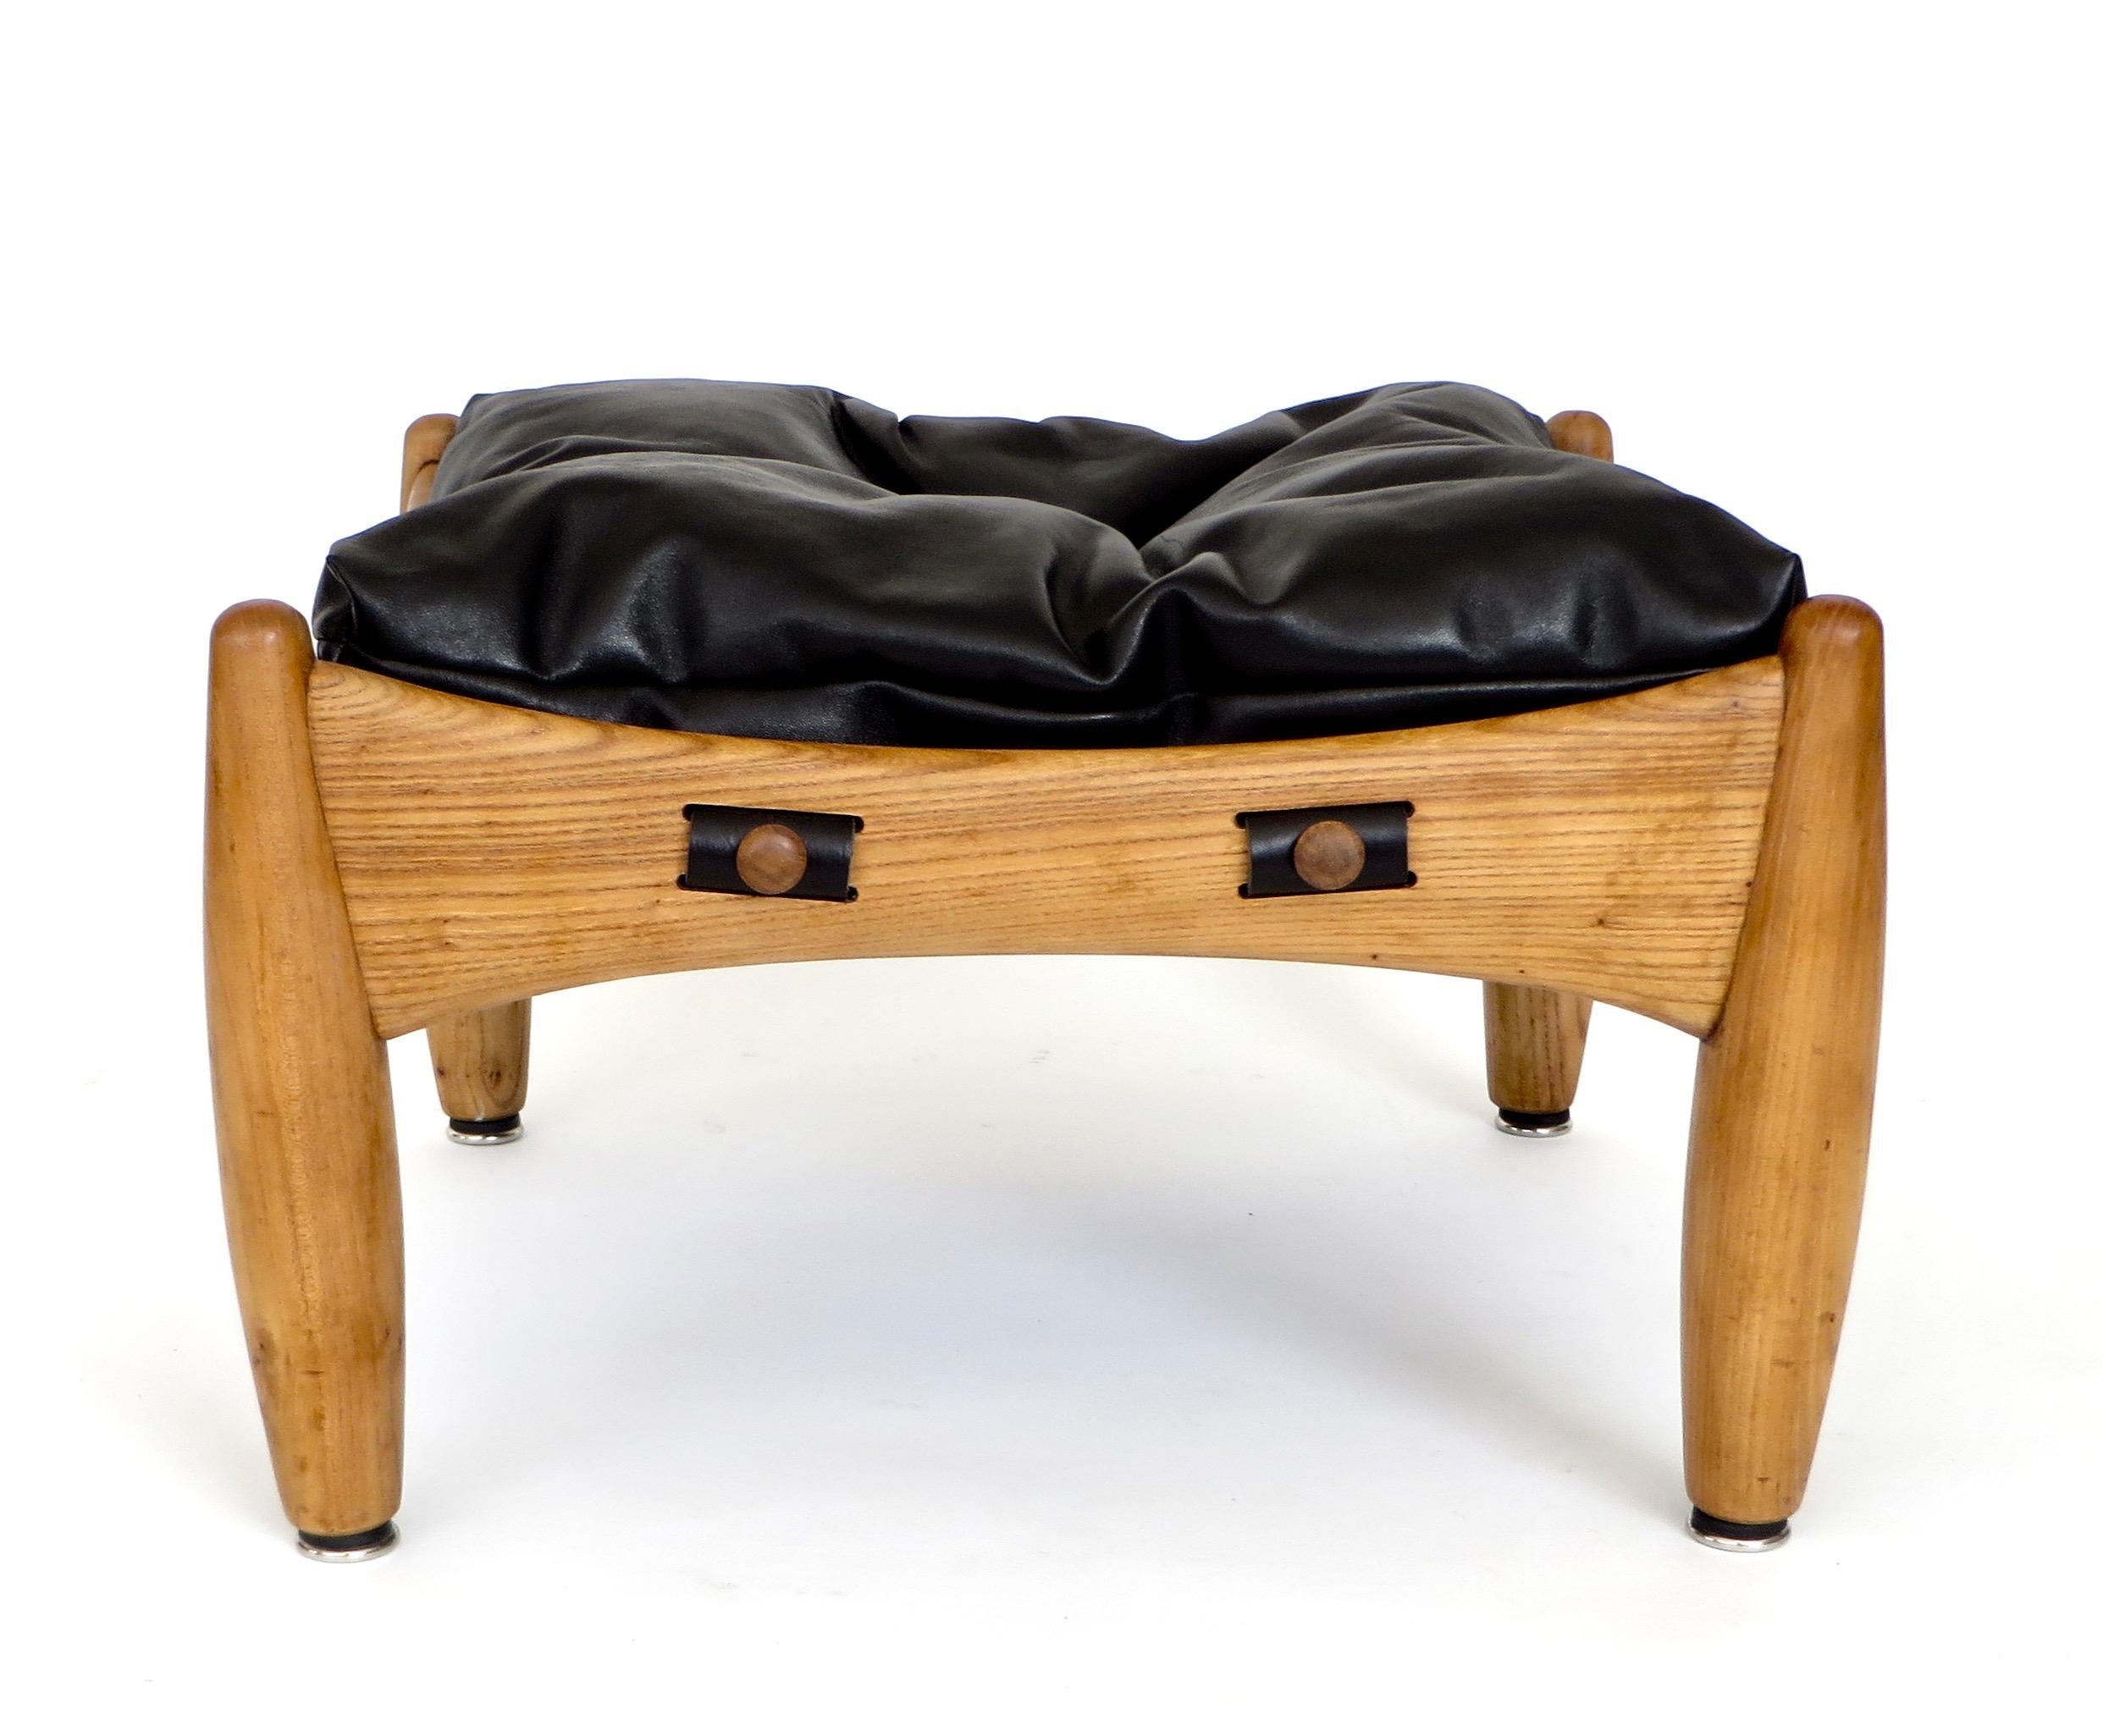 The iconic Brazilian designer Sergio Rodrigues Sheriff model stool in Jacaranda wood with black leather cushion. Footstool only.
In 1961 the armchair was prized at the IV Furniture Biennial in Italy. This footstool has its original tag of ISA